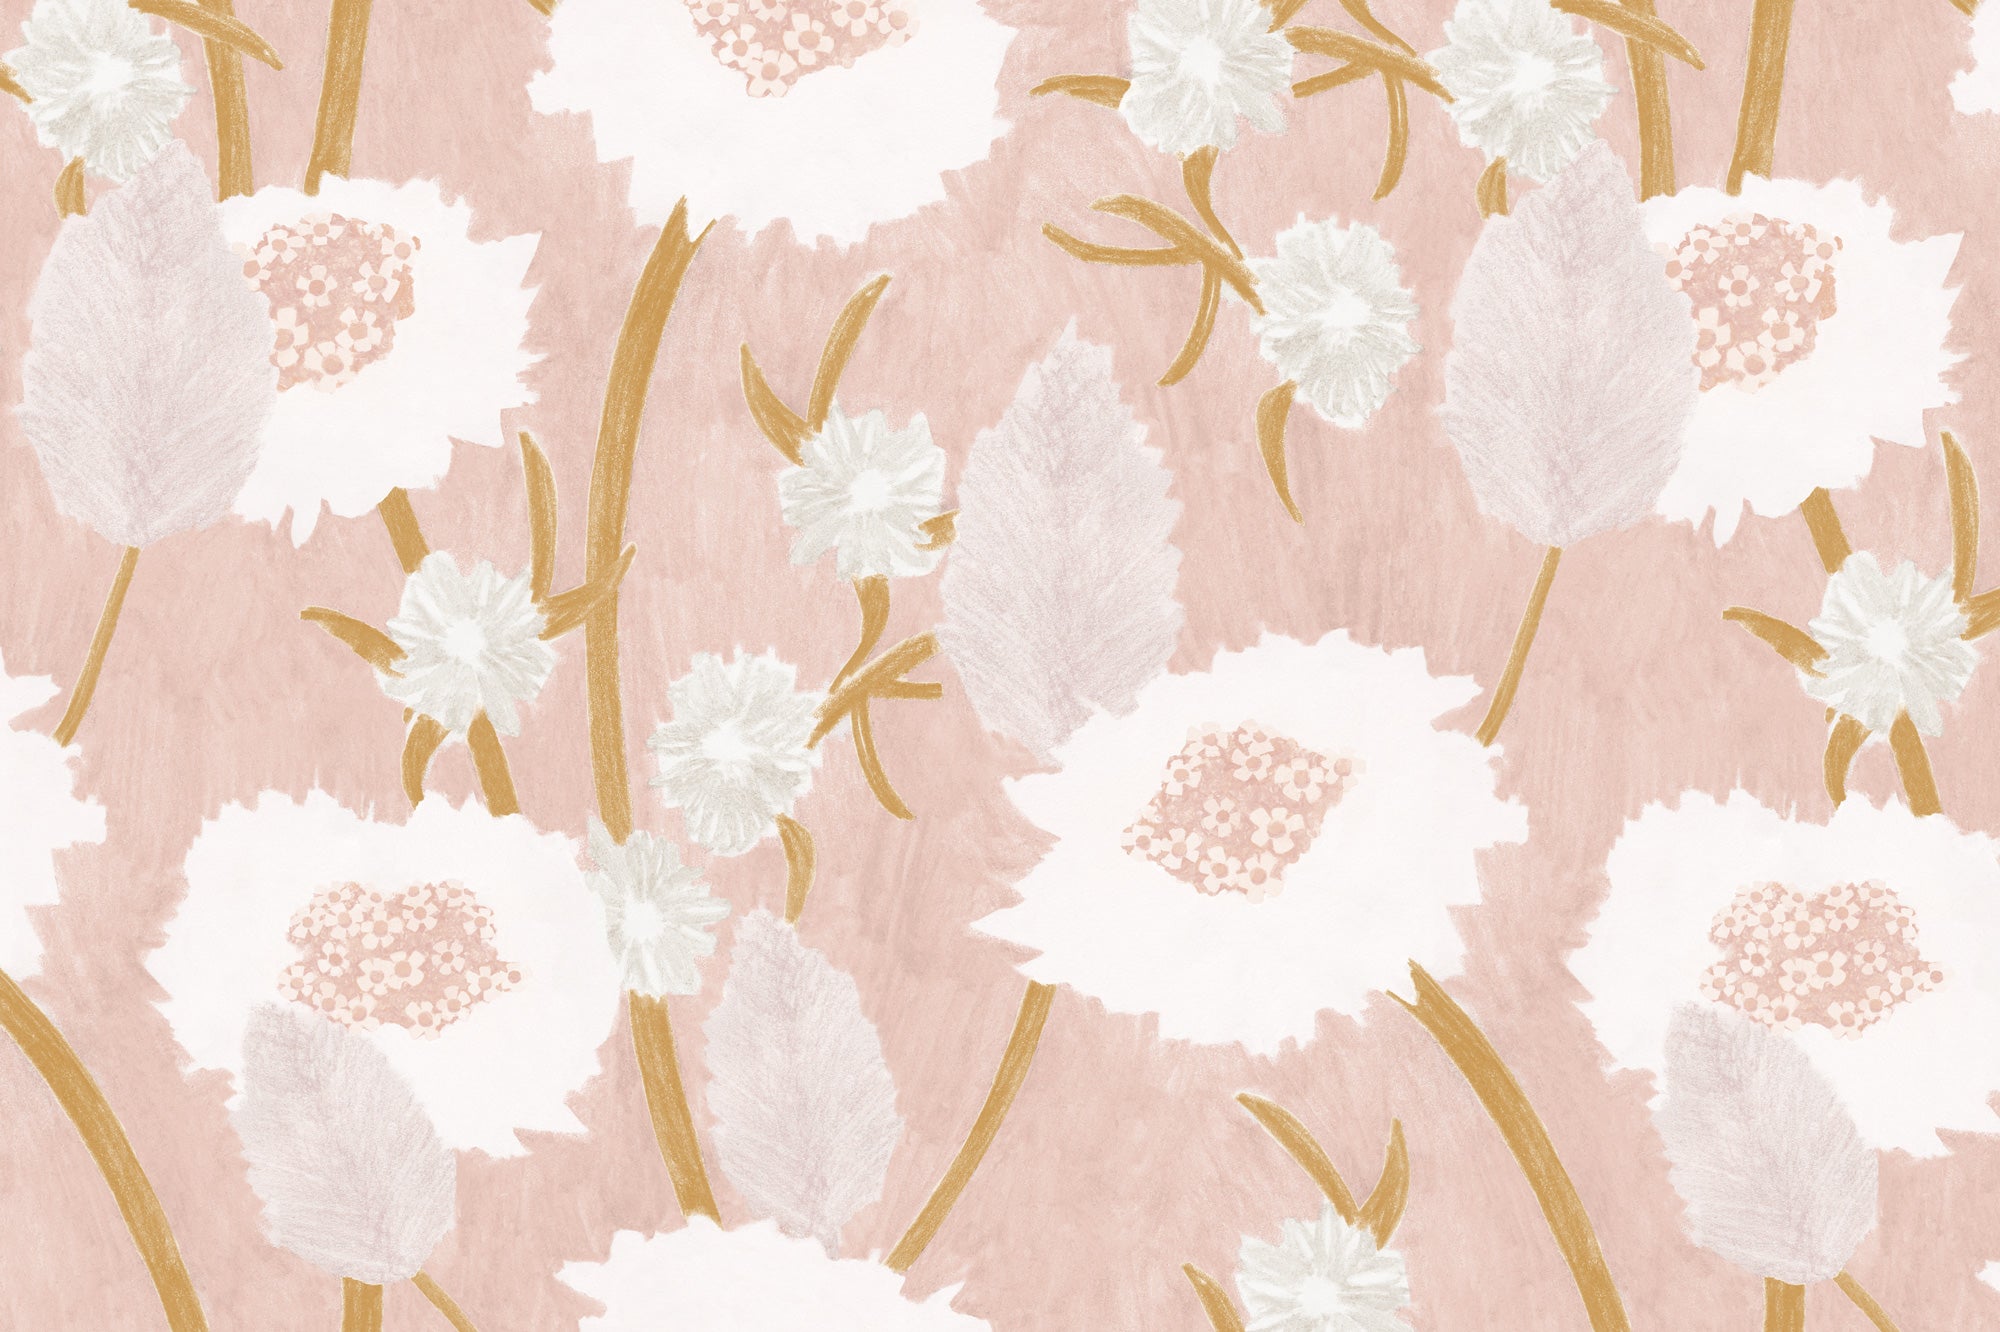 Detail of wallpaper in a playful floral print in shades of pink, white and tan on a light pink field.